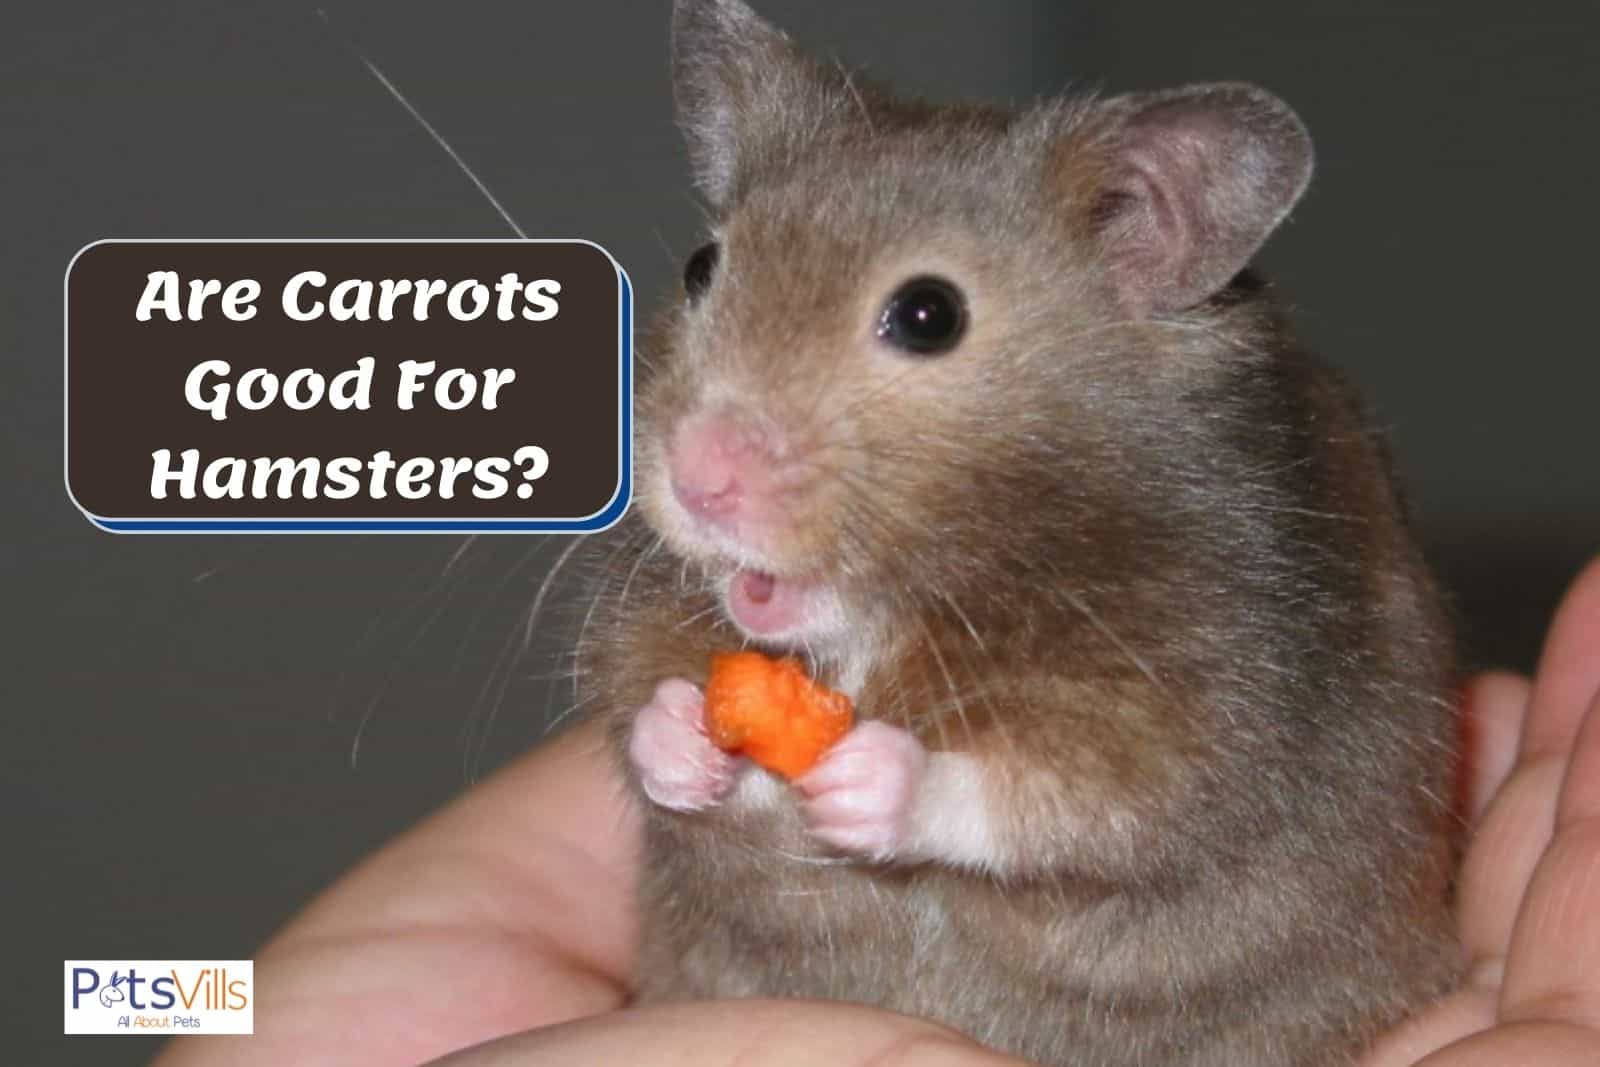 hamster holding a carrot but can hamsters eat carrots safely?